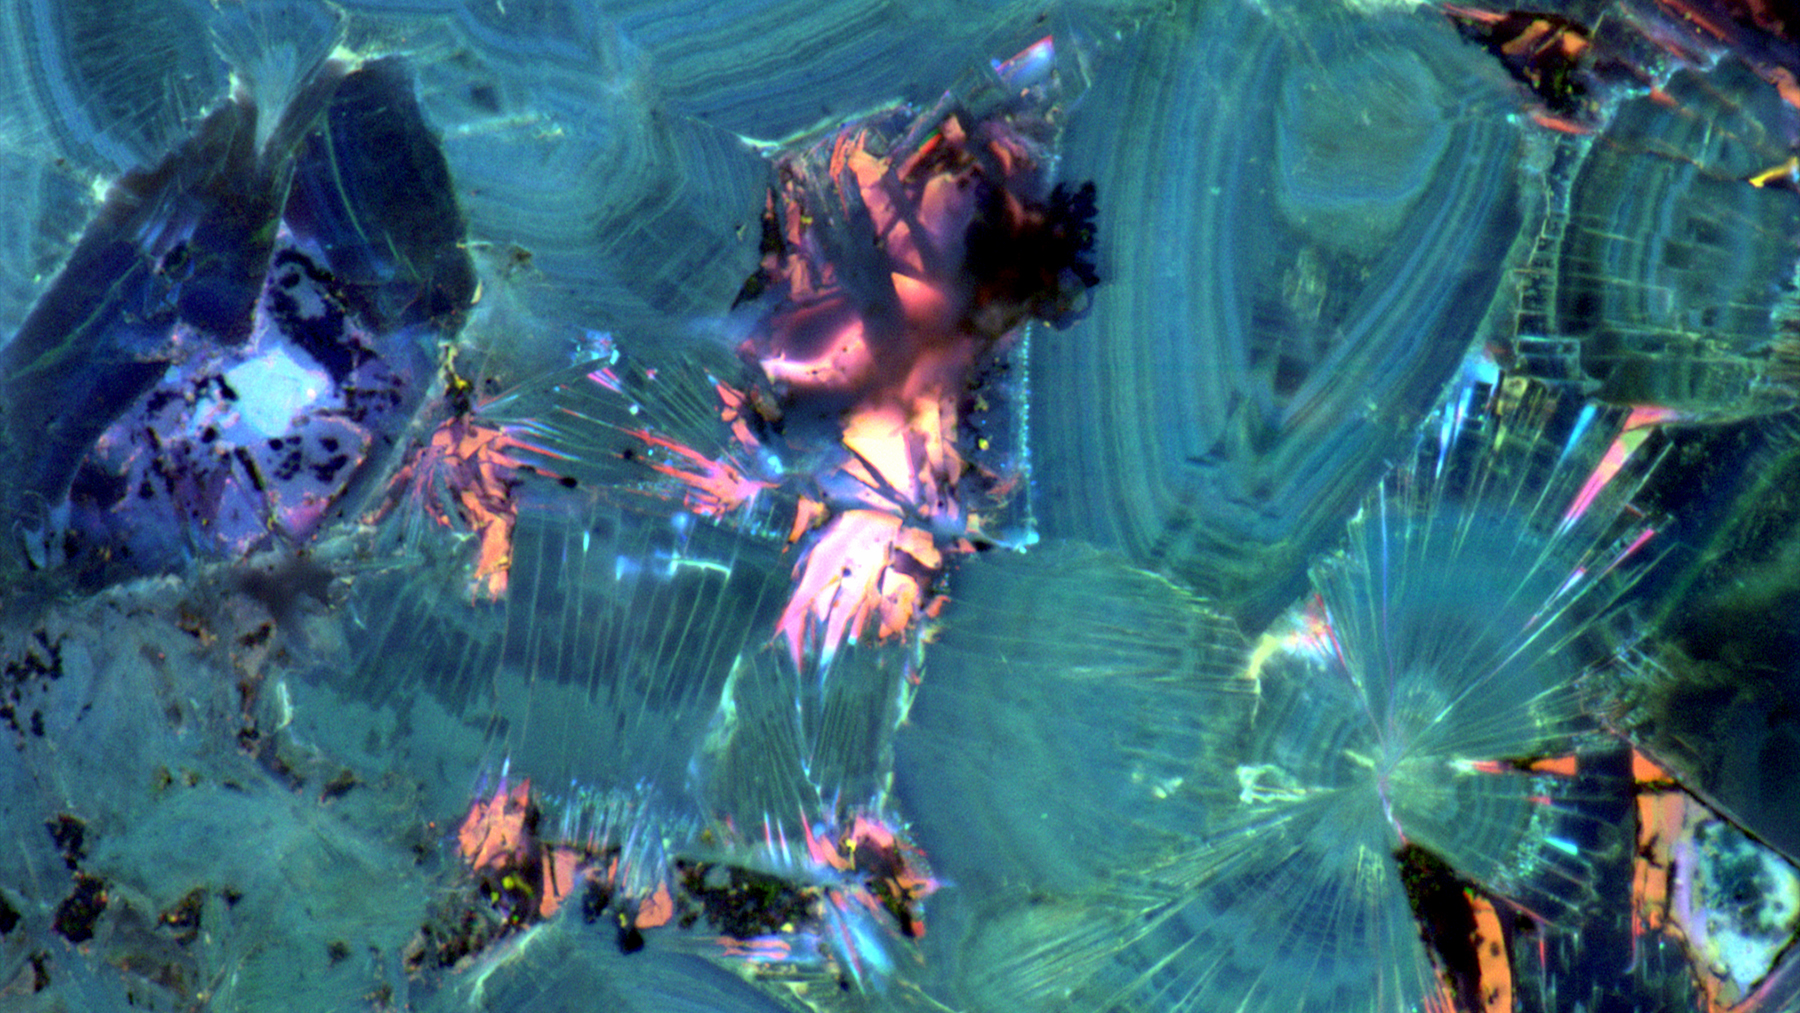 microscopic view of a kidney stone shows beauty of its geological make-up